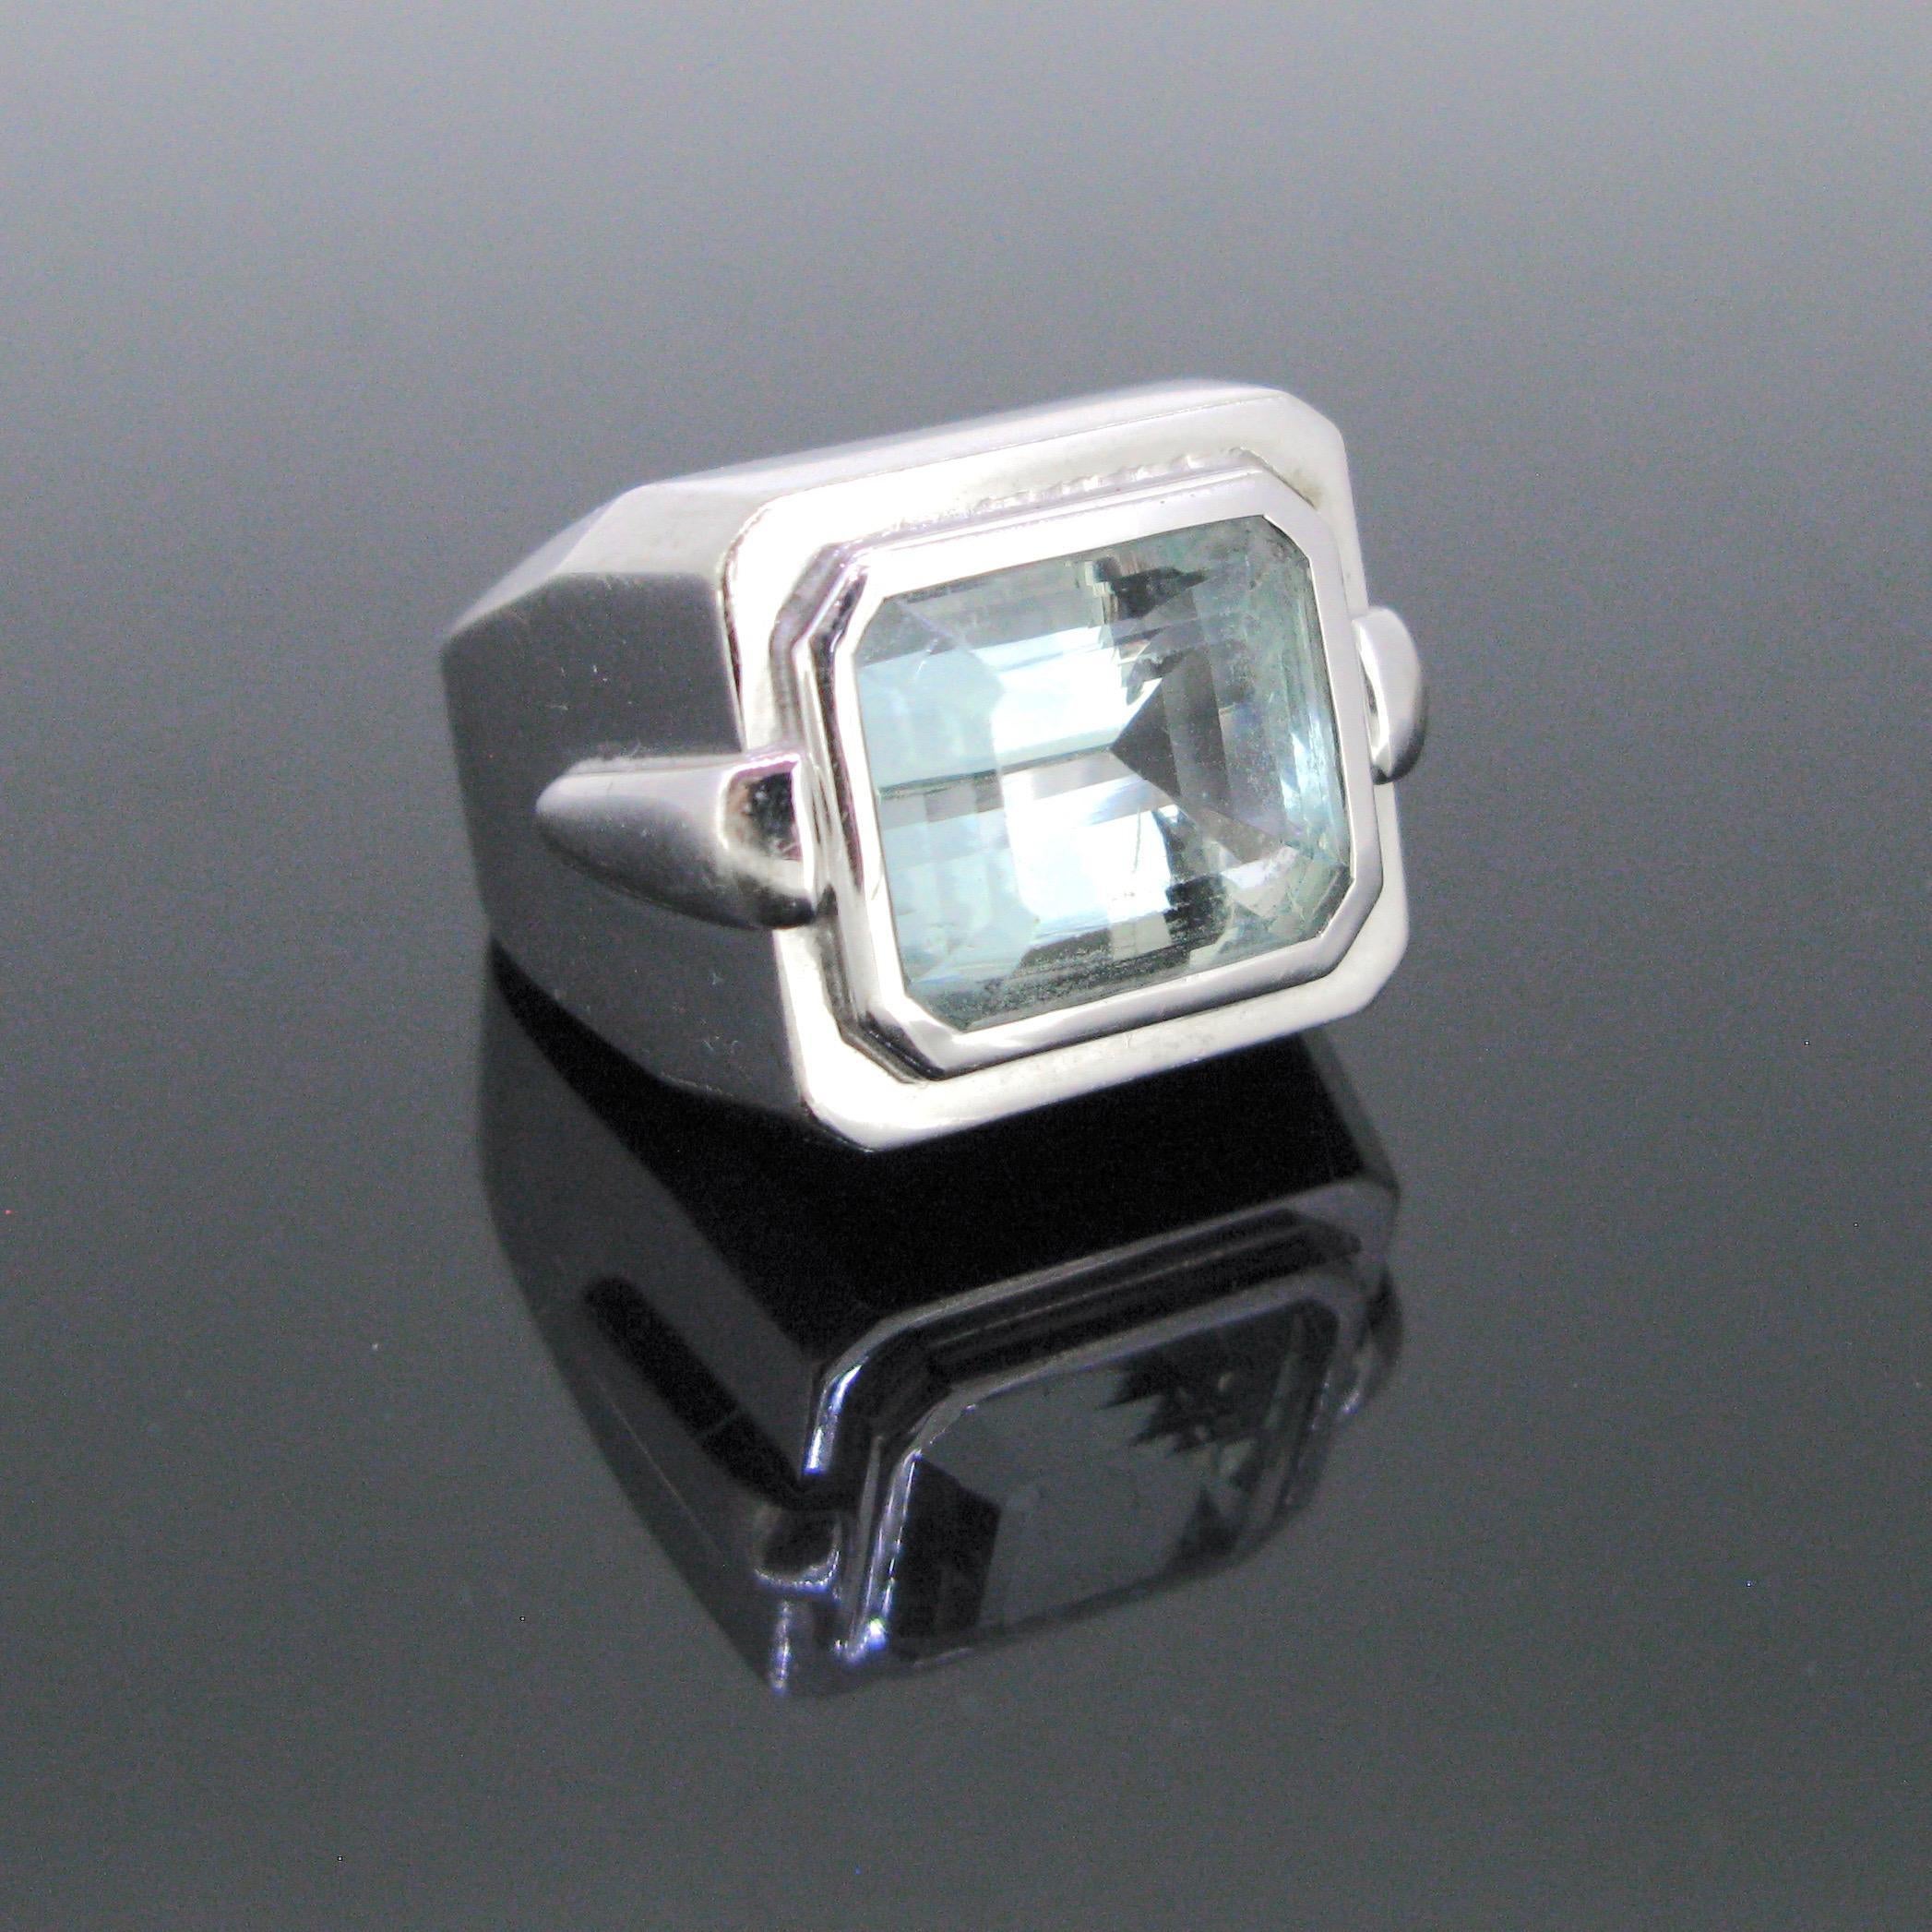 Weight:	24.72gr


Metal:		18kt white gold


Stones:	1 Aquamarine
•	Cut:	Emerald
•	Total carat weight:	9.50ct approximately


Condition:	Very Good



Comments:	This bold ring is made in 18kt white gold. It is set with an eye clean aquamarine weighing